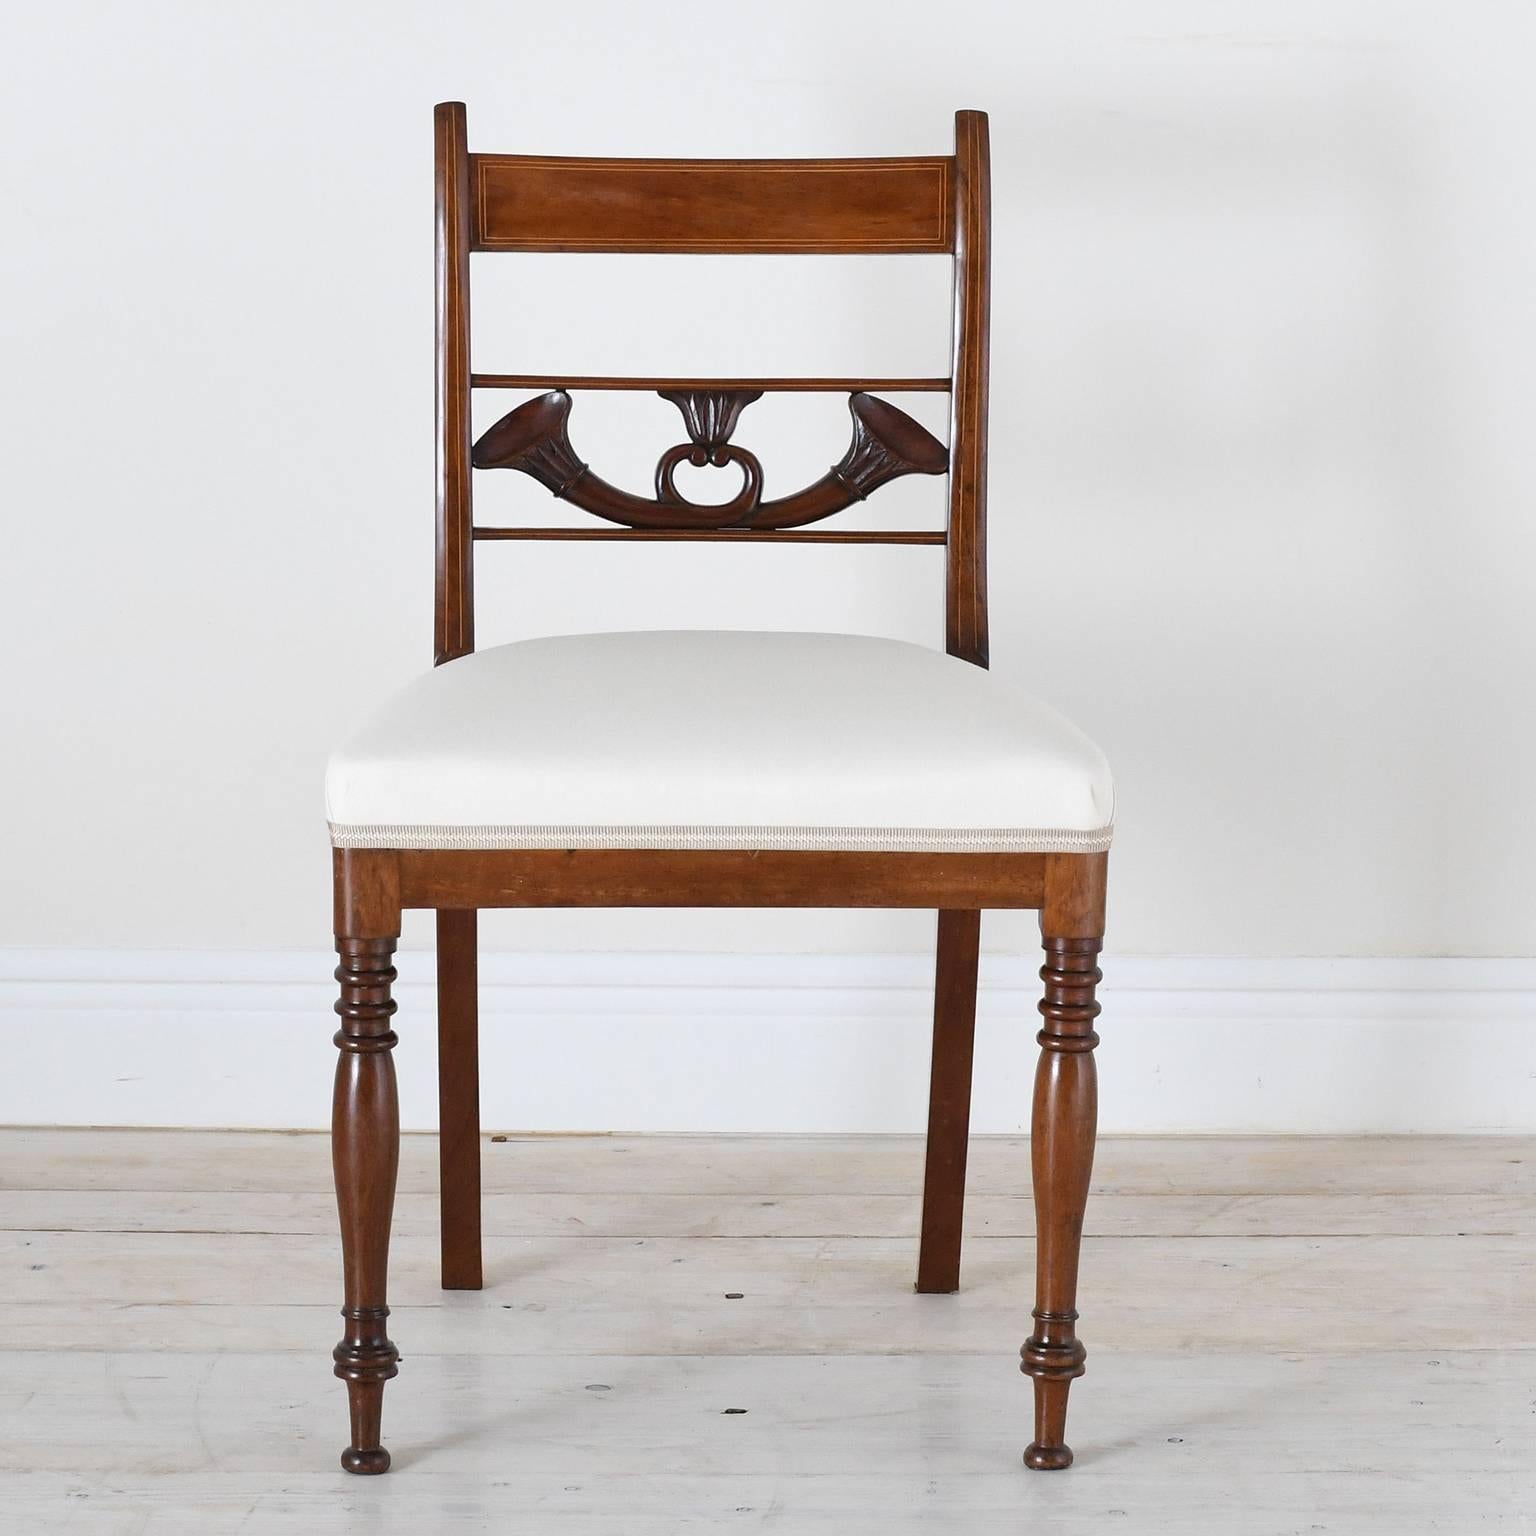 A fine set of four English Regency dining chairs in mahogany with carved bugles resting on back chair rail below the top slat which is line inlaid, with turned front legs and saber rear legs, and upholstered seat, England, circa 1830.

Measures: 19